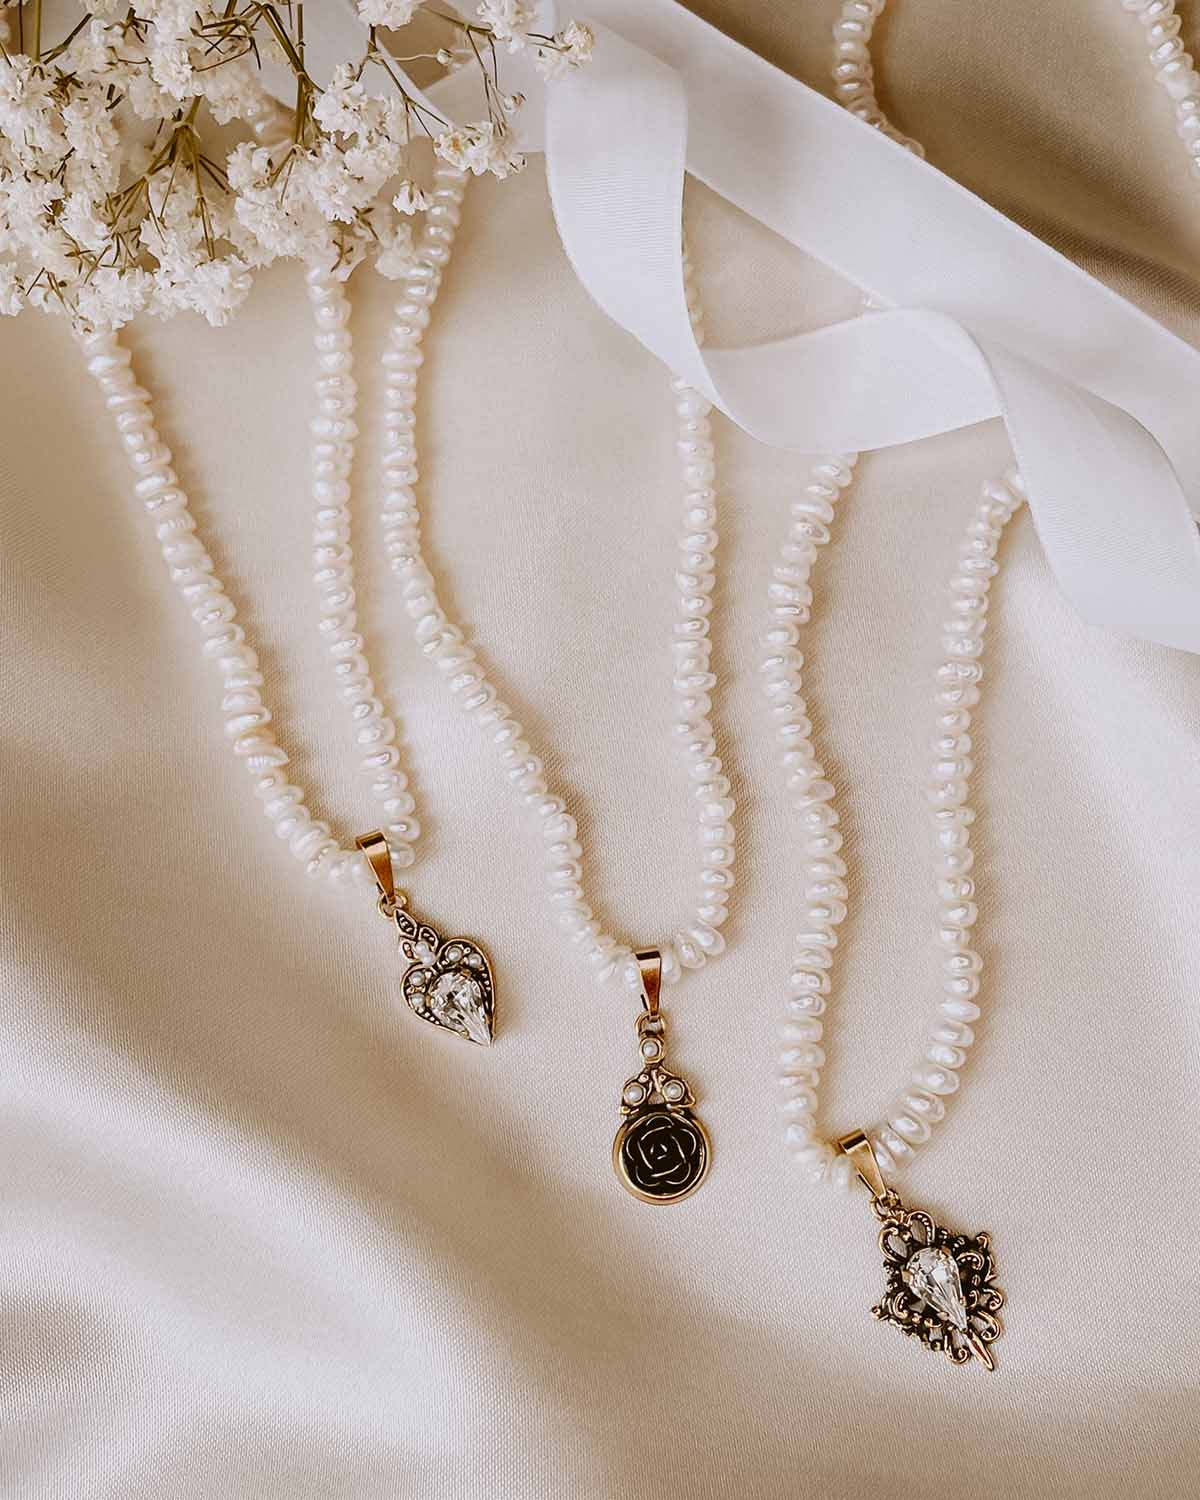 Pendant and Pearl Necklace (Handmade in Italy)